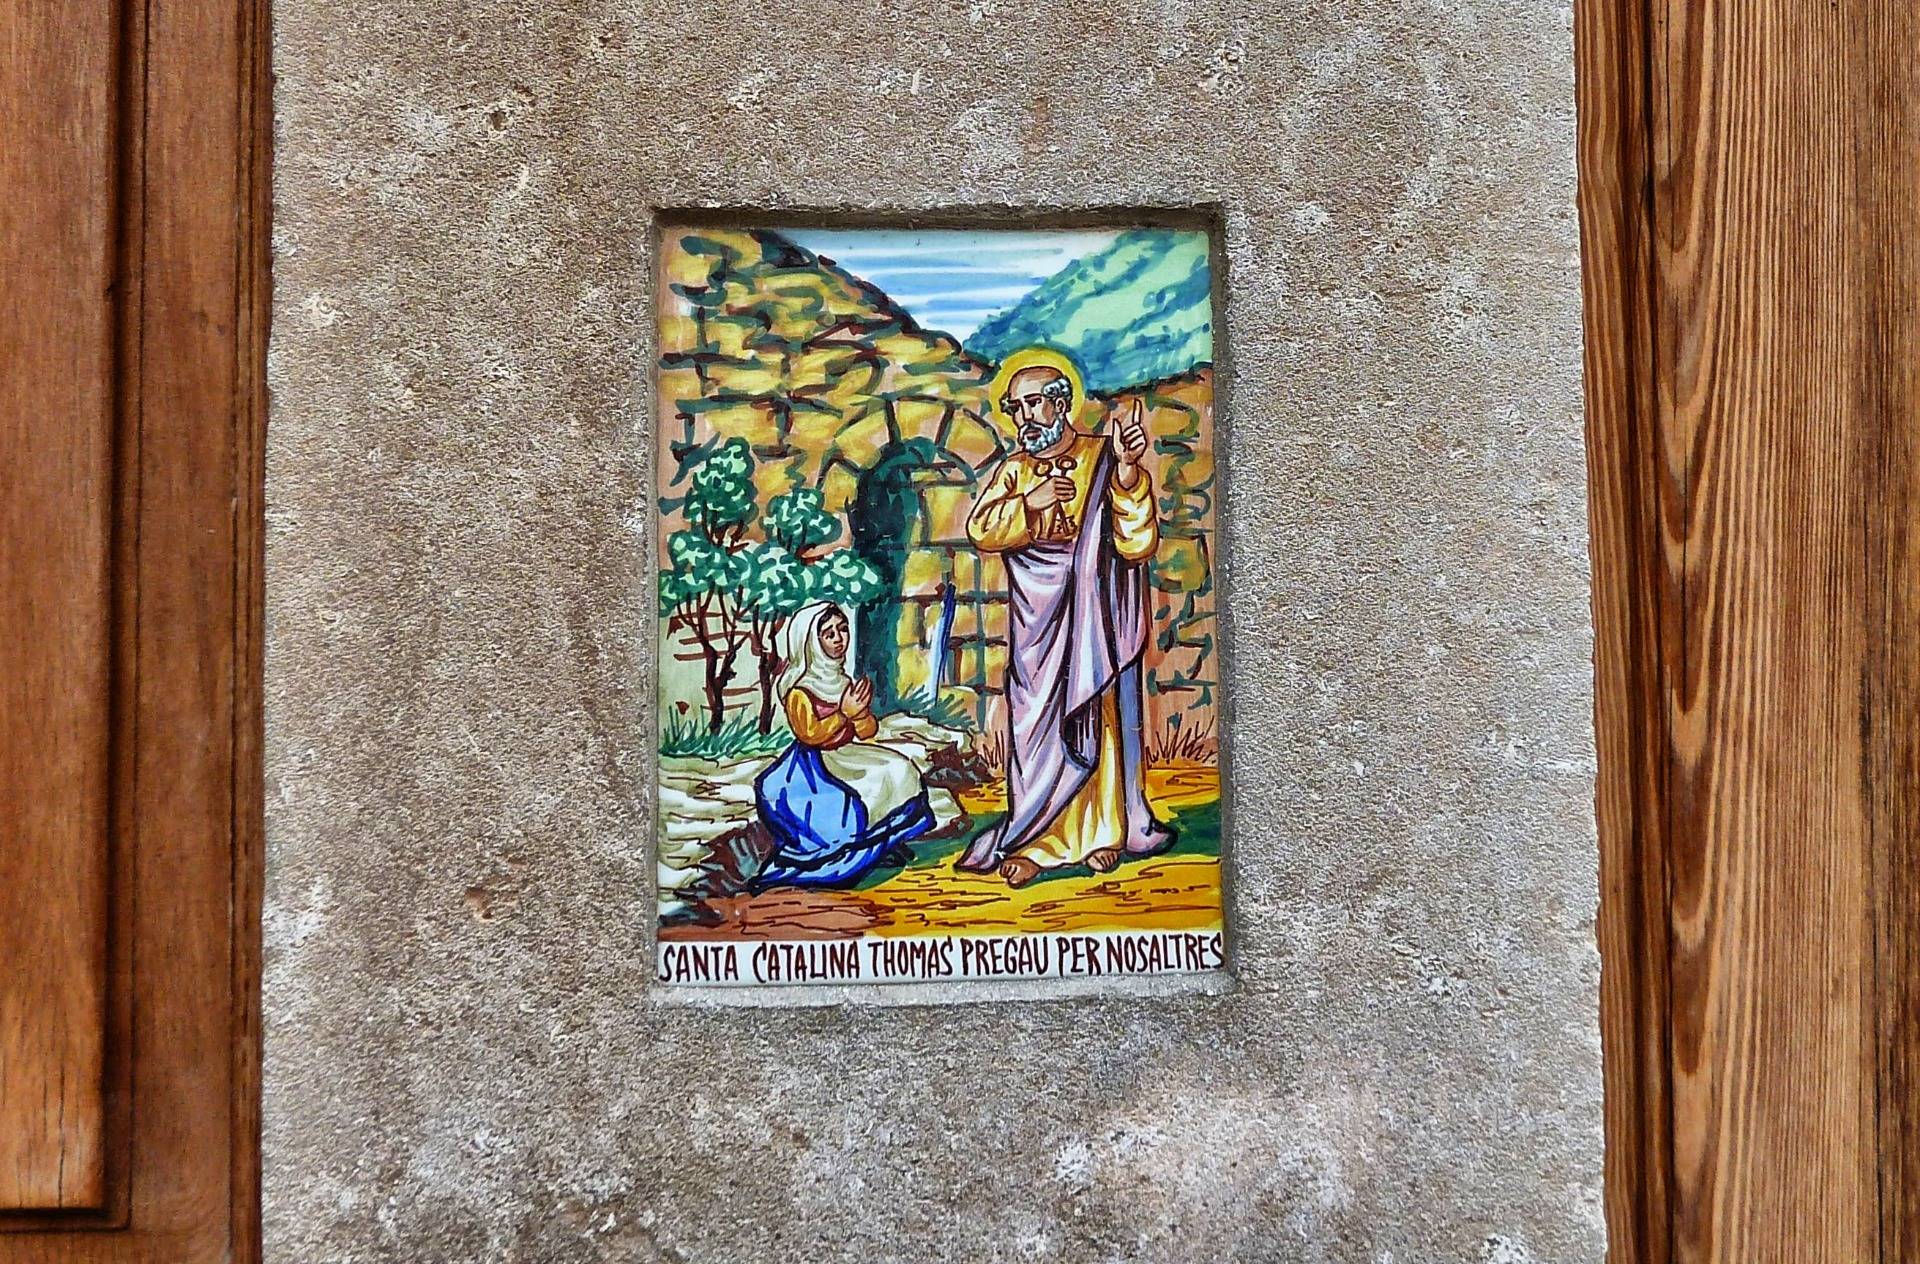 A tiles for a holy man